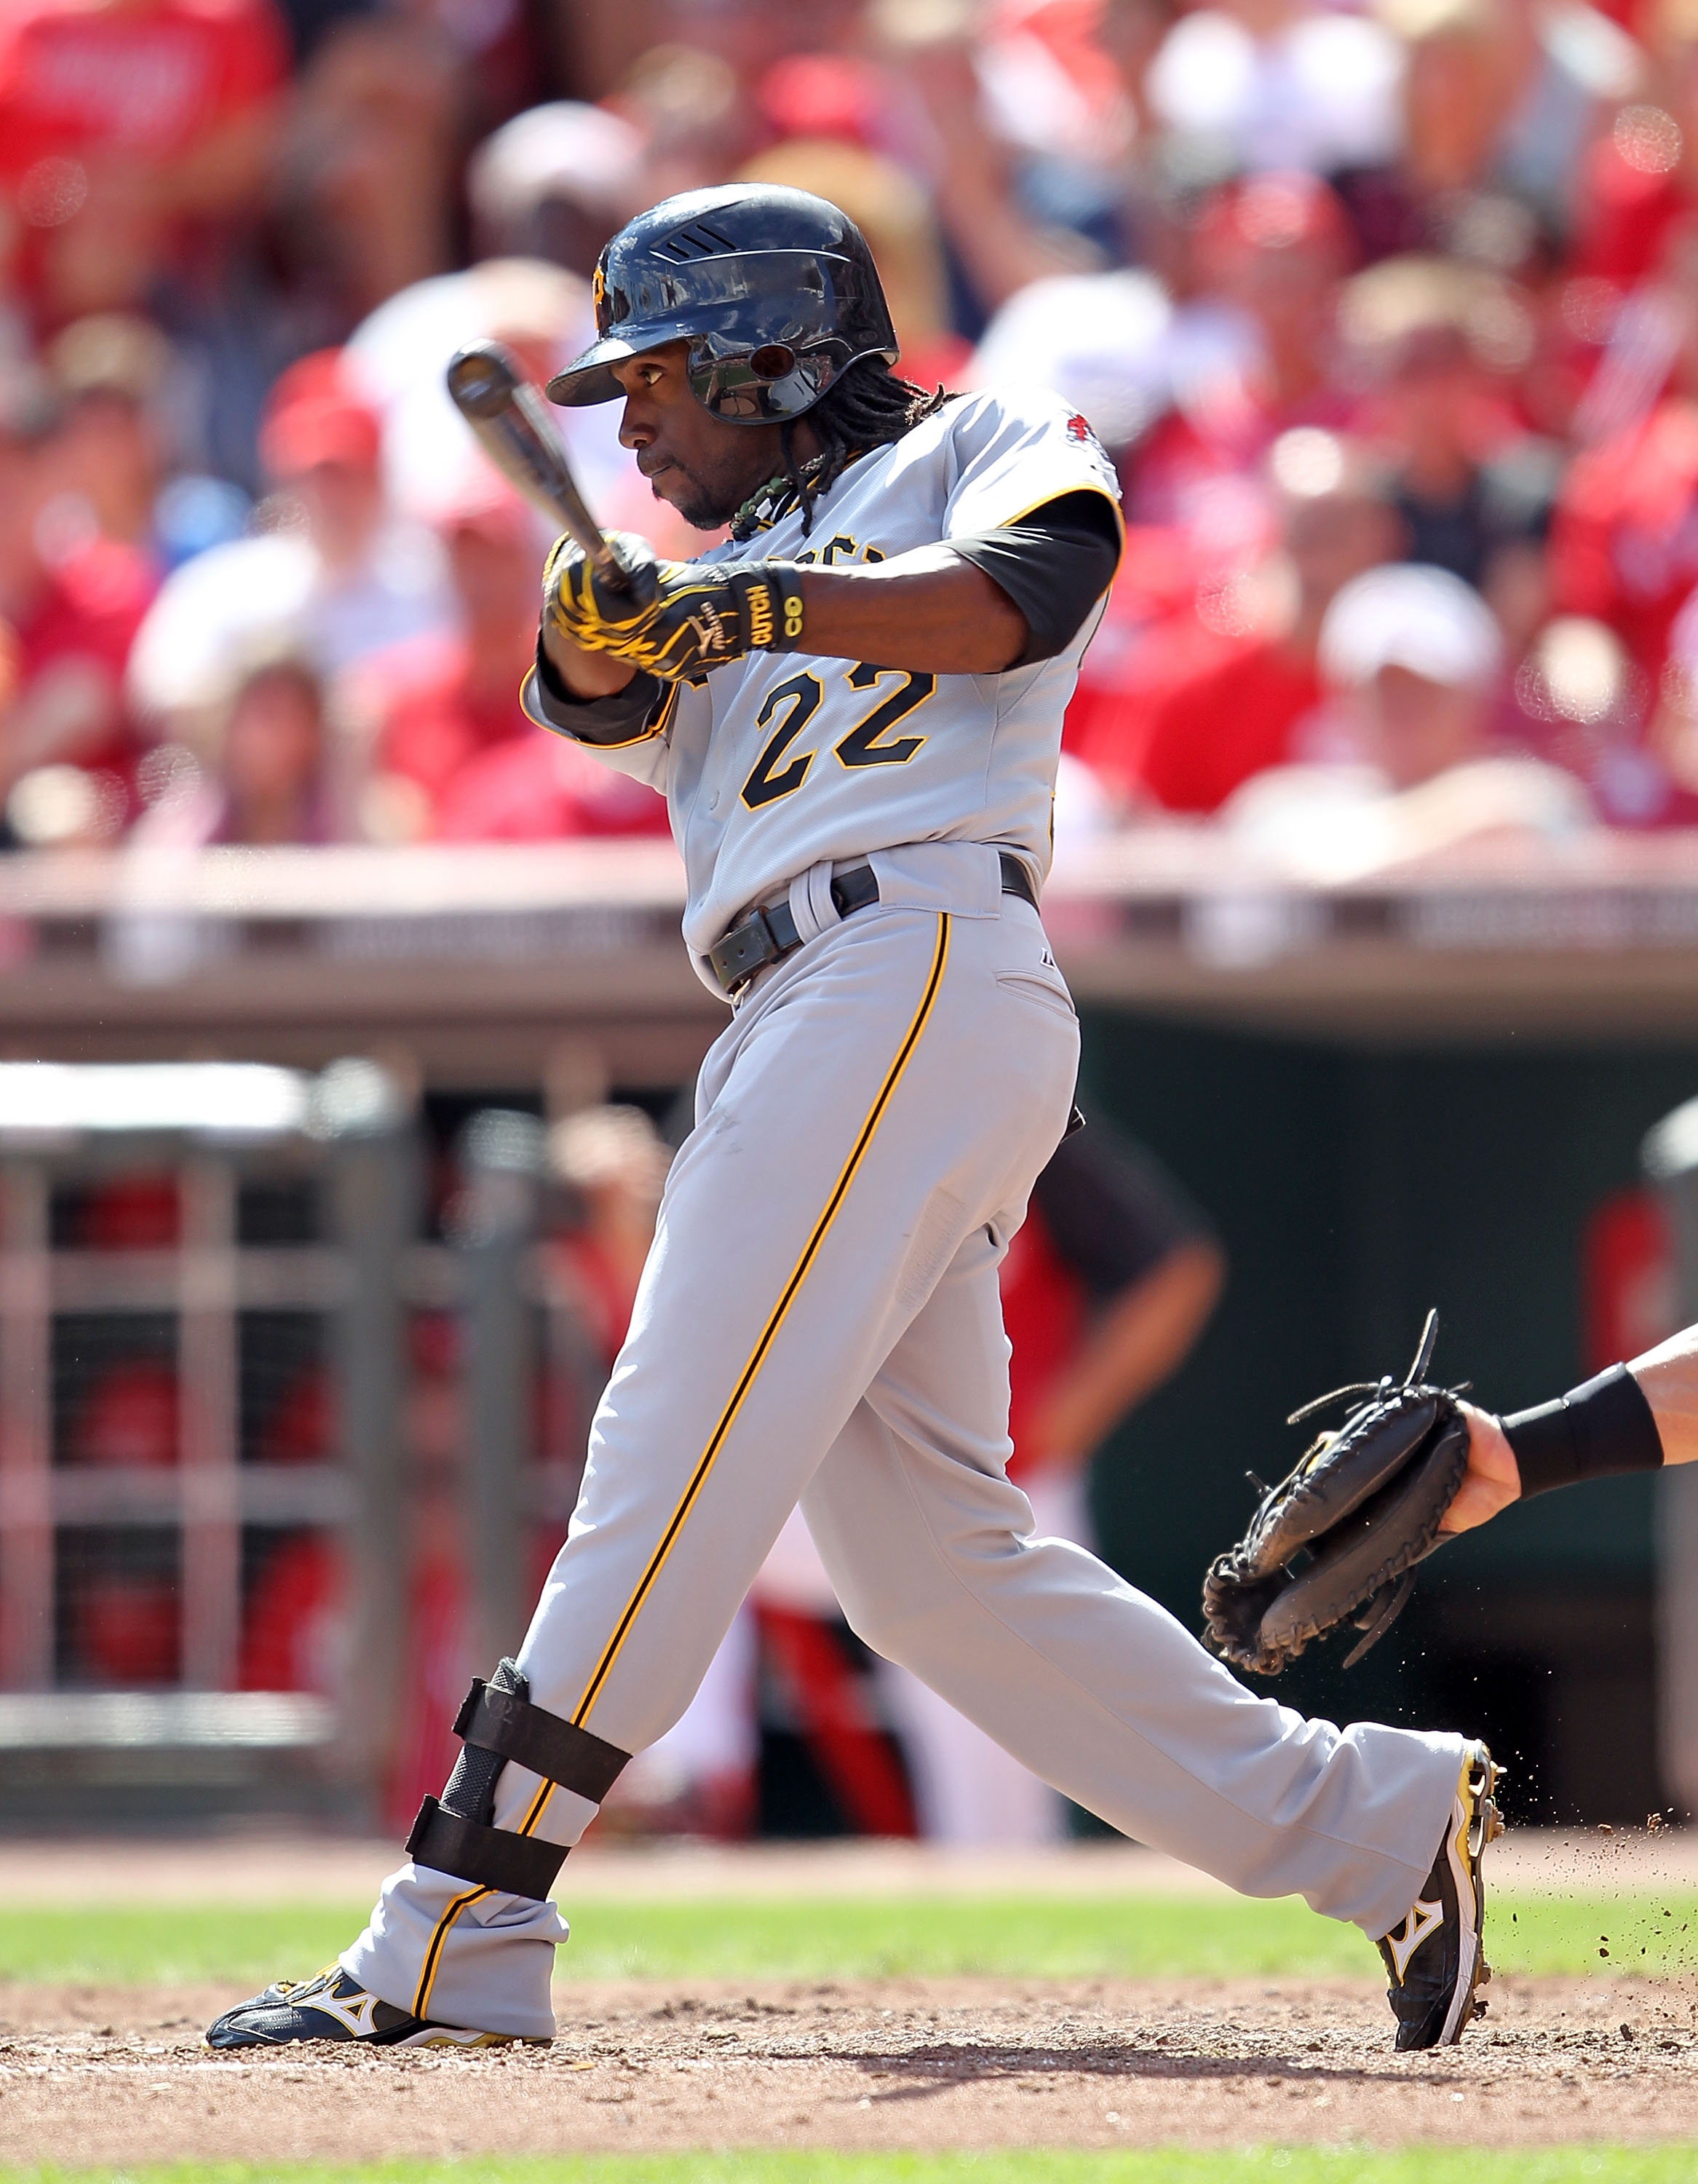 CINCINNATI - SEPTEMBER 12:  Andrew McCutchen #22 of the Pittsburgh Pirates swings at a pitch during the game against the Cincinnati Reds at Great American Ballpark on September 12, 2010 in Cincinnati, Ohio. He hit a three run double in the ninth inning to